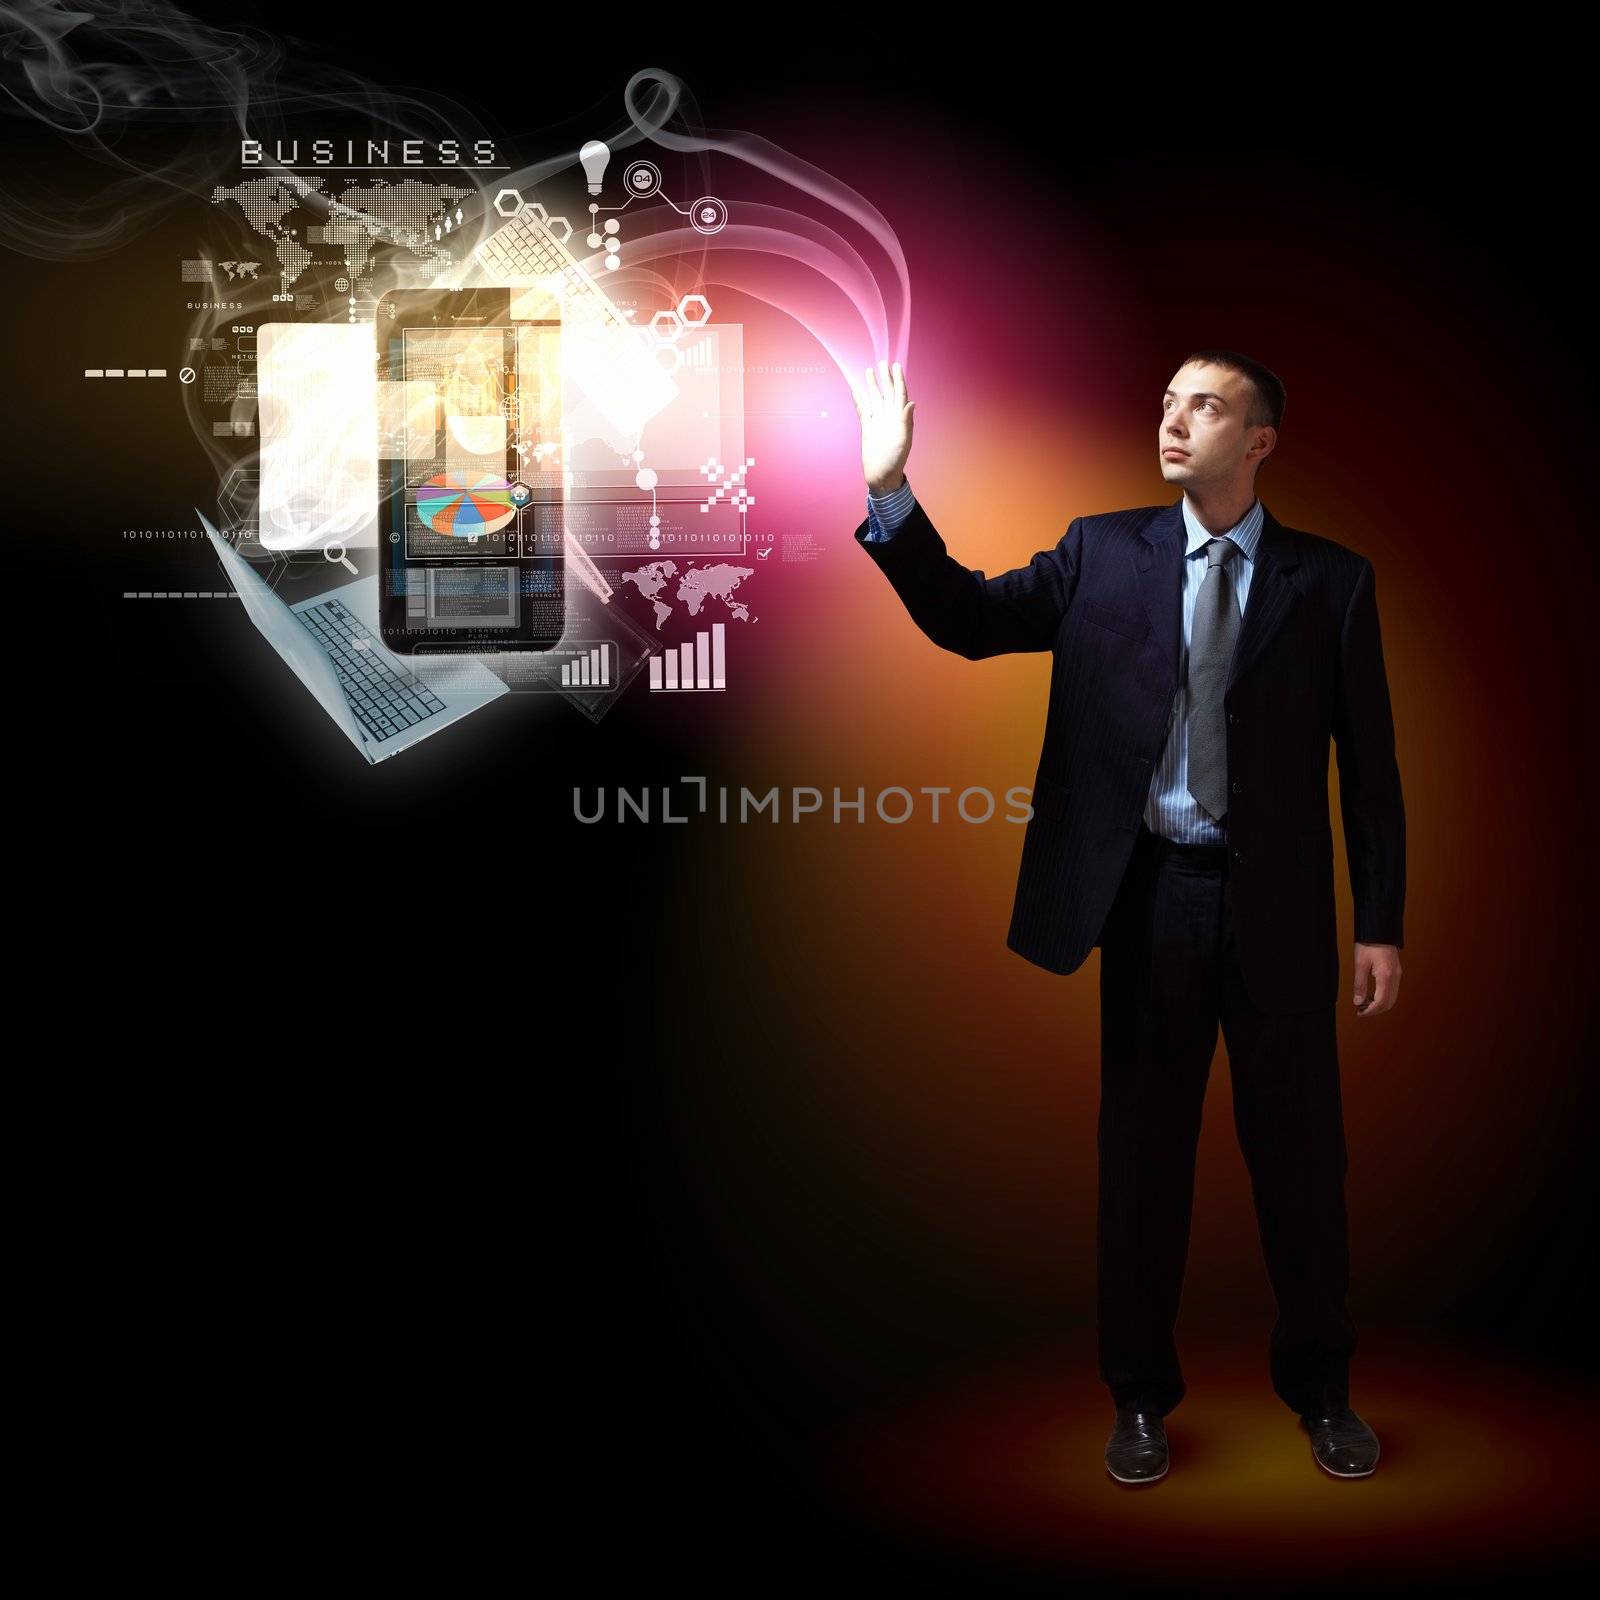 Businessman standing with modern technology symbols next to him